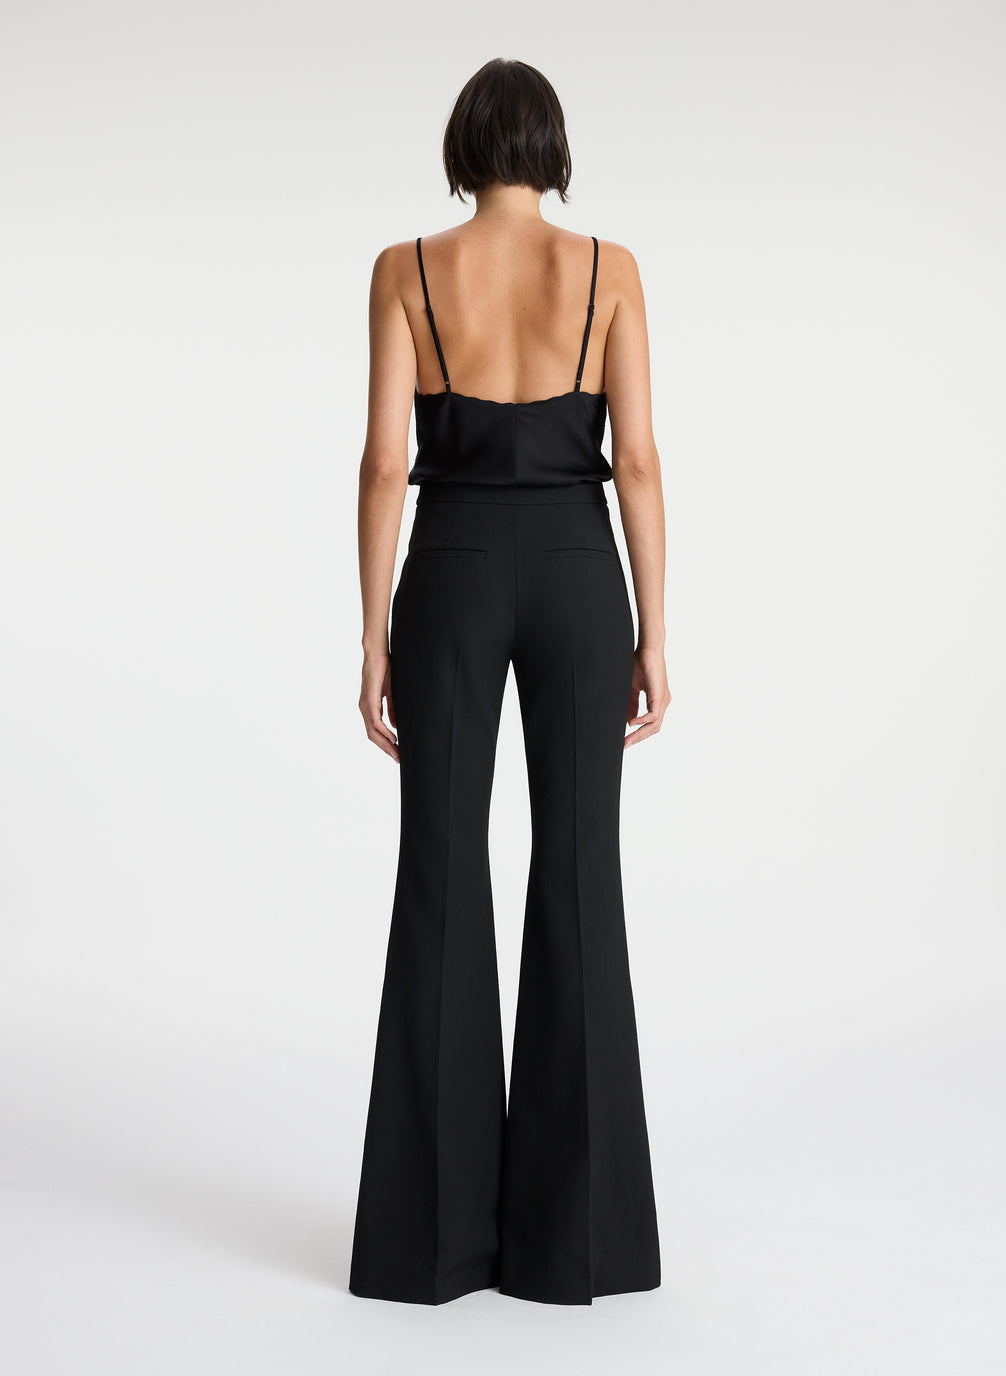 back  view of woman wearing black camisole top and black flared pants